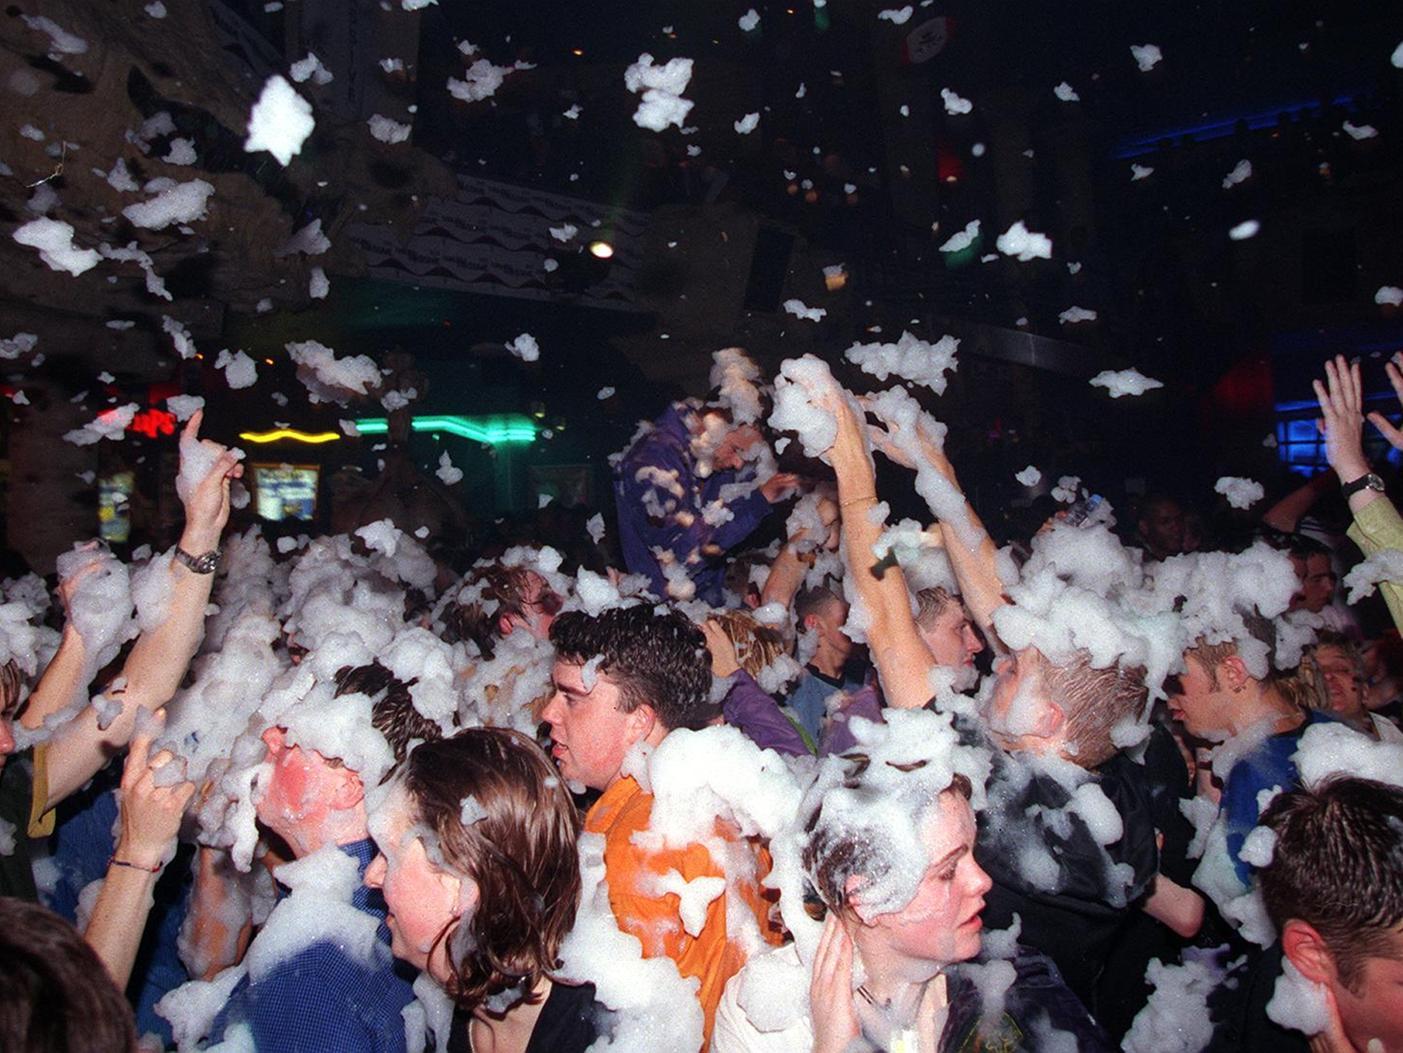 Hundreds of revellers enjoyed the foam party. Were you one of them?